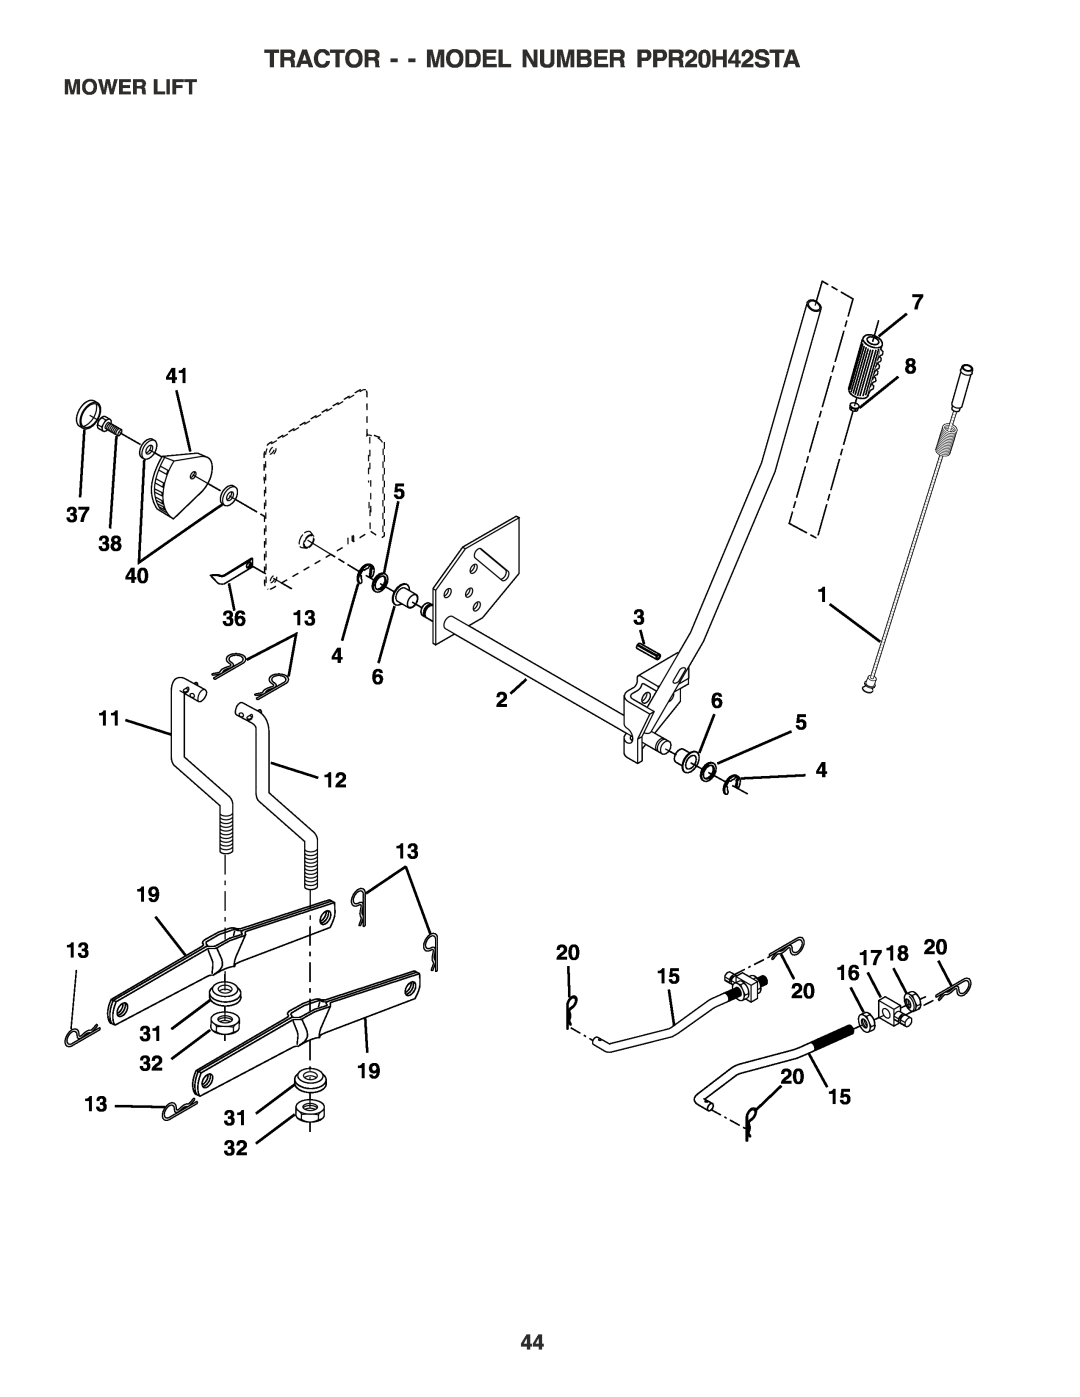 Poulan owner manual MOWER LIFT 7, 41 37 38 40 11 19 13 31 32 13, TRACTOR - - MODEL NUMBER PPR20H42STA 